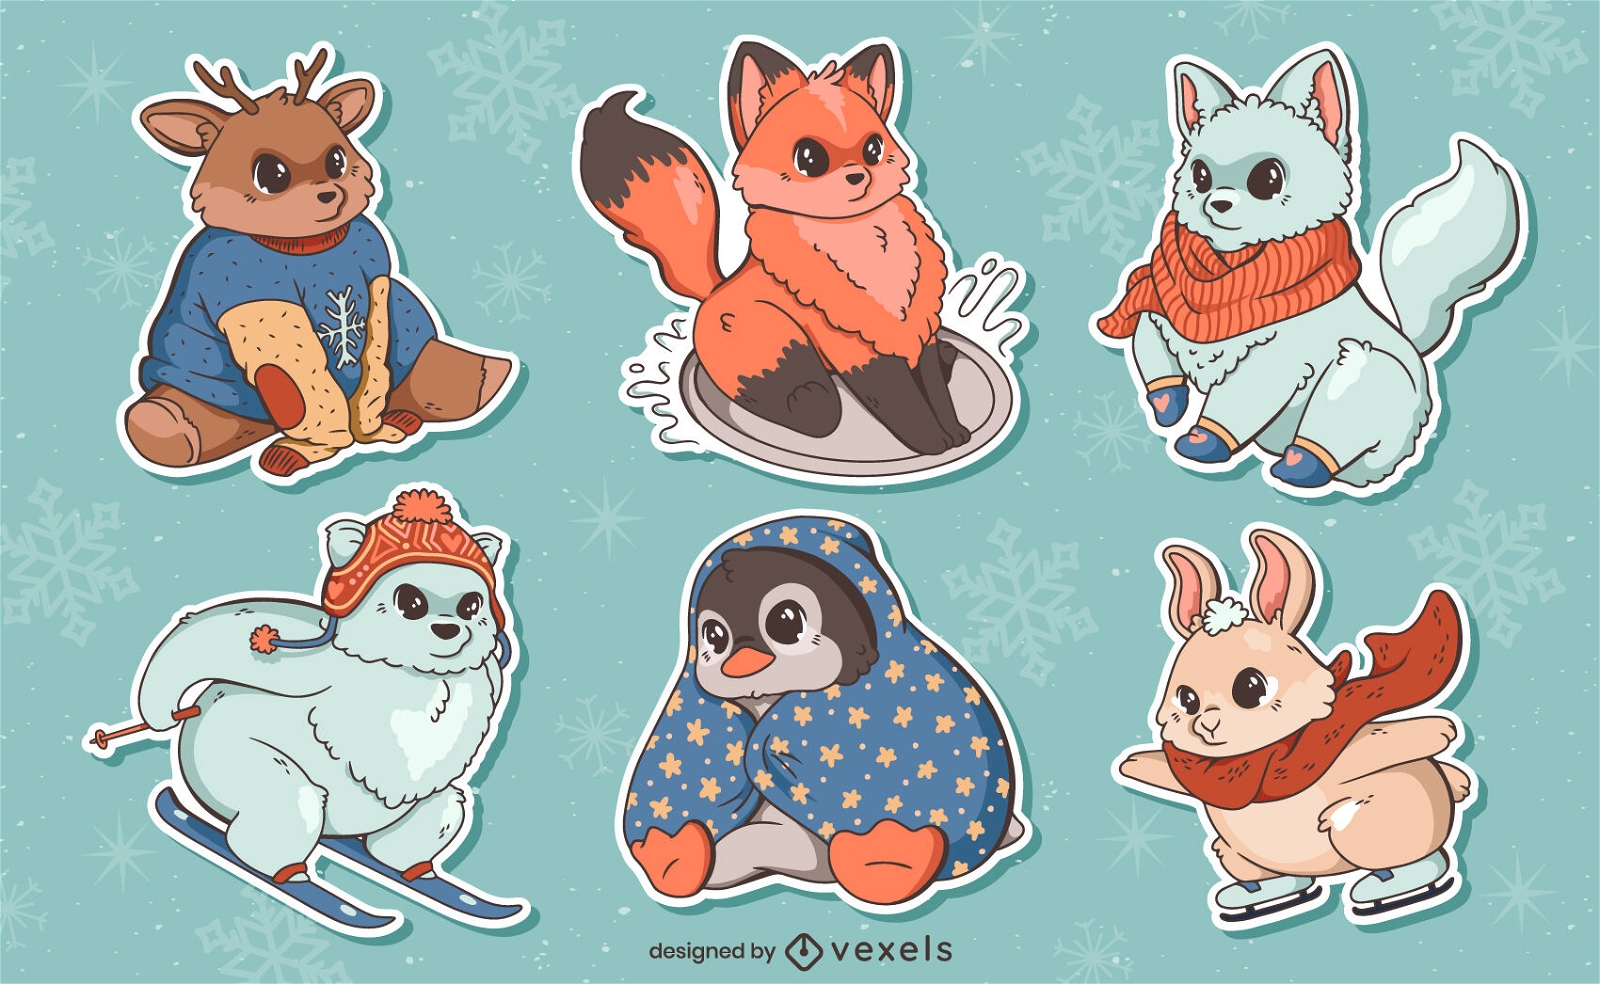 https://images.vexels.com/content/317655/preview/winter-animal-characters-sticker-set-a9a7c9.png